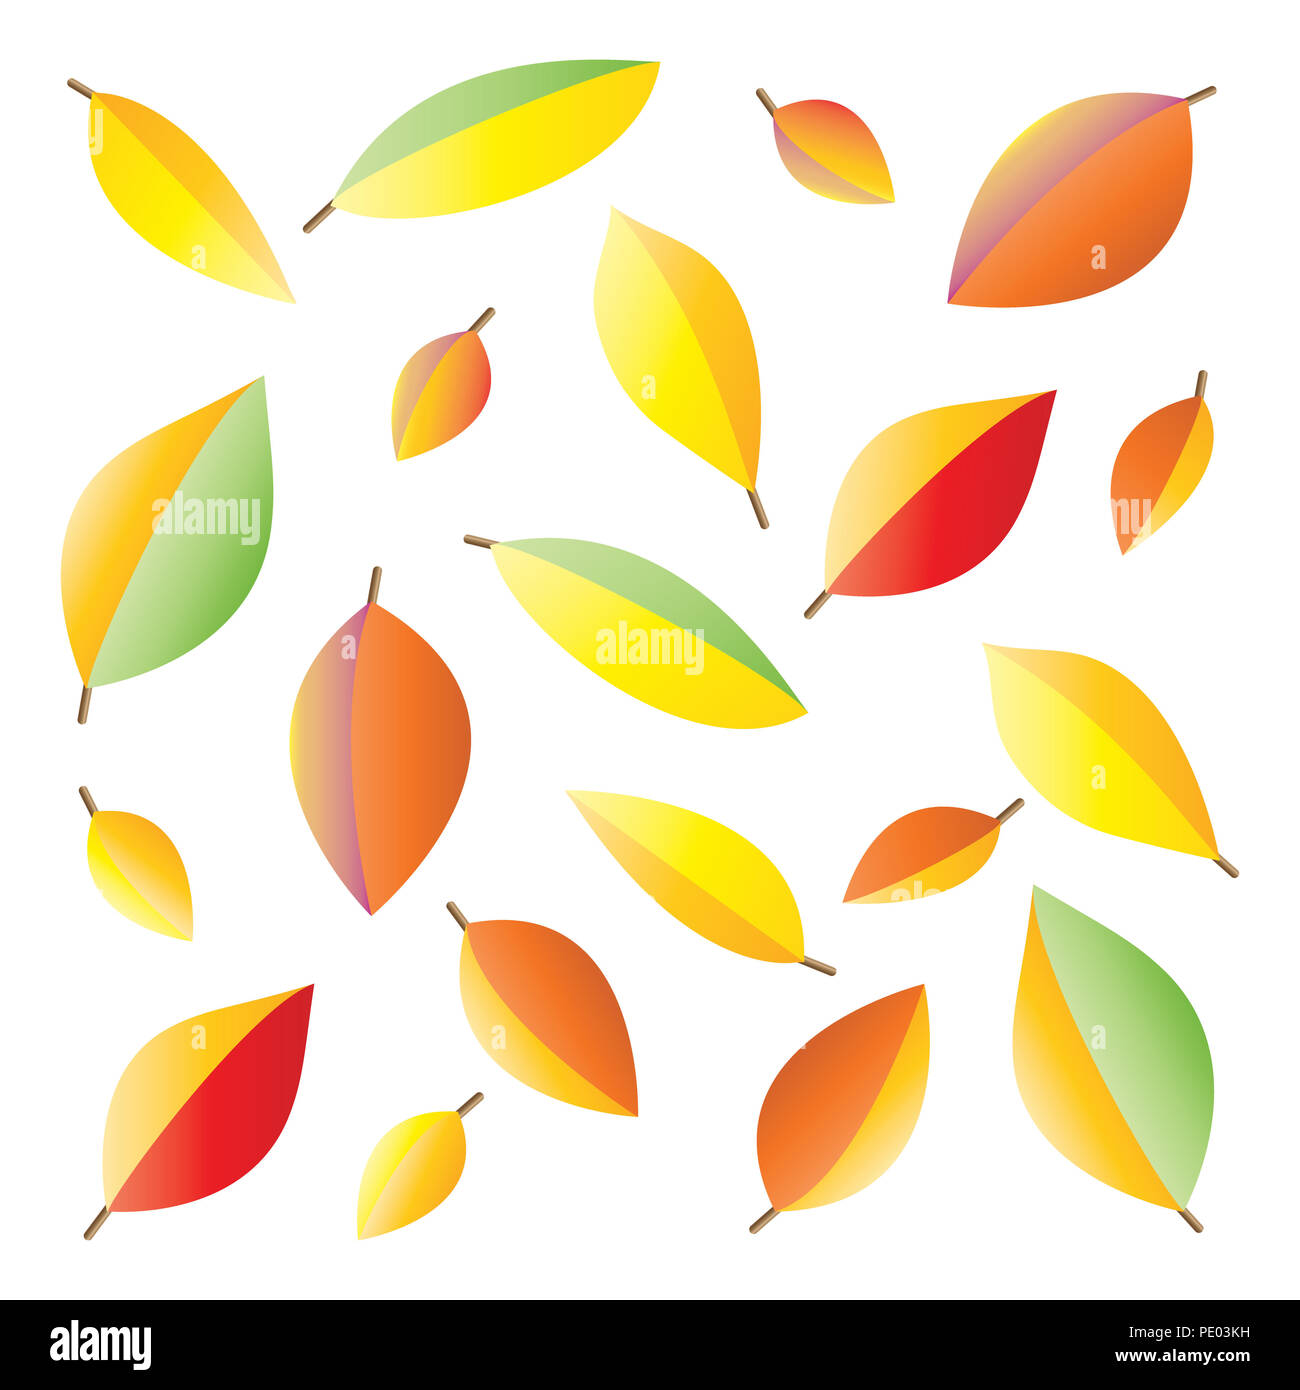 Pattern of colorful autumn leaves on a white background. Stock Photo